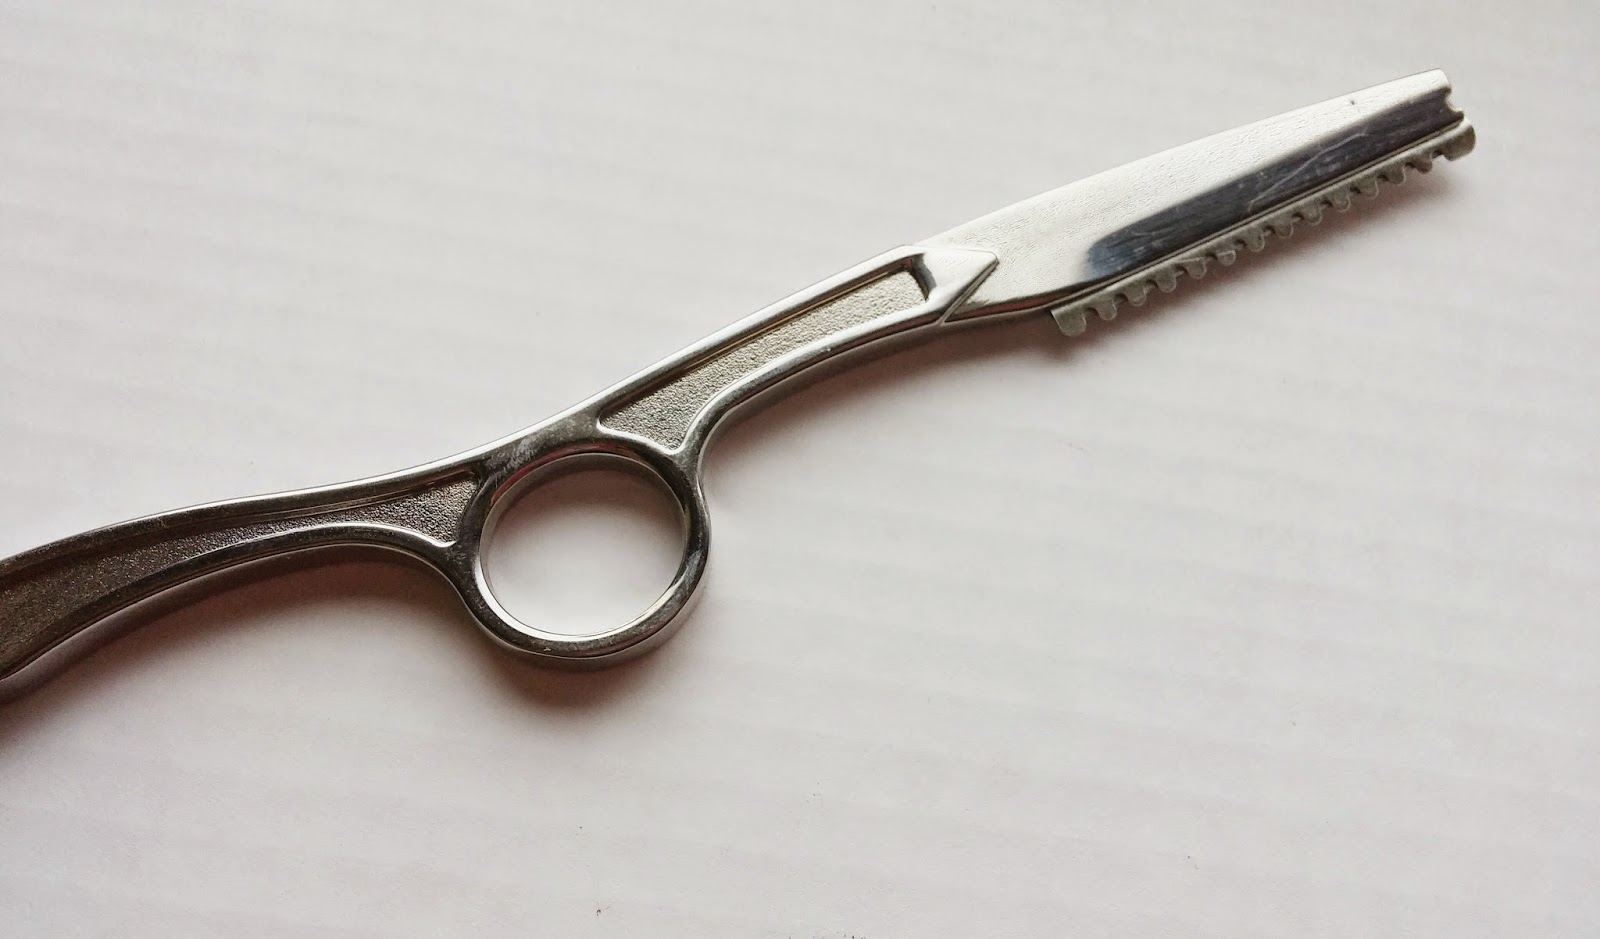 how to hold and use cutting shears